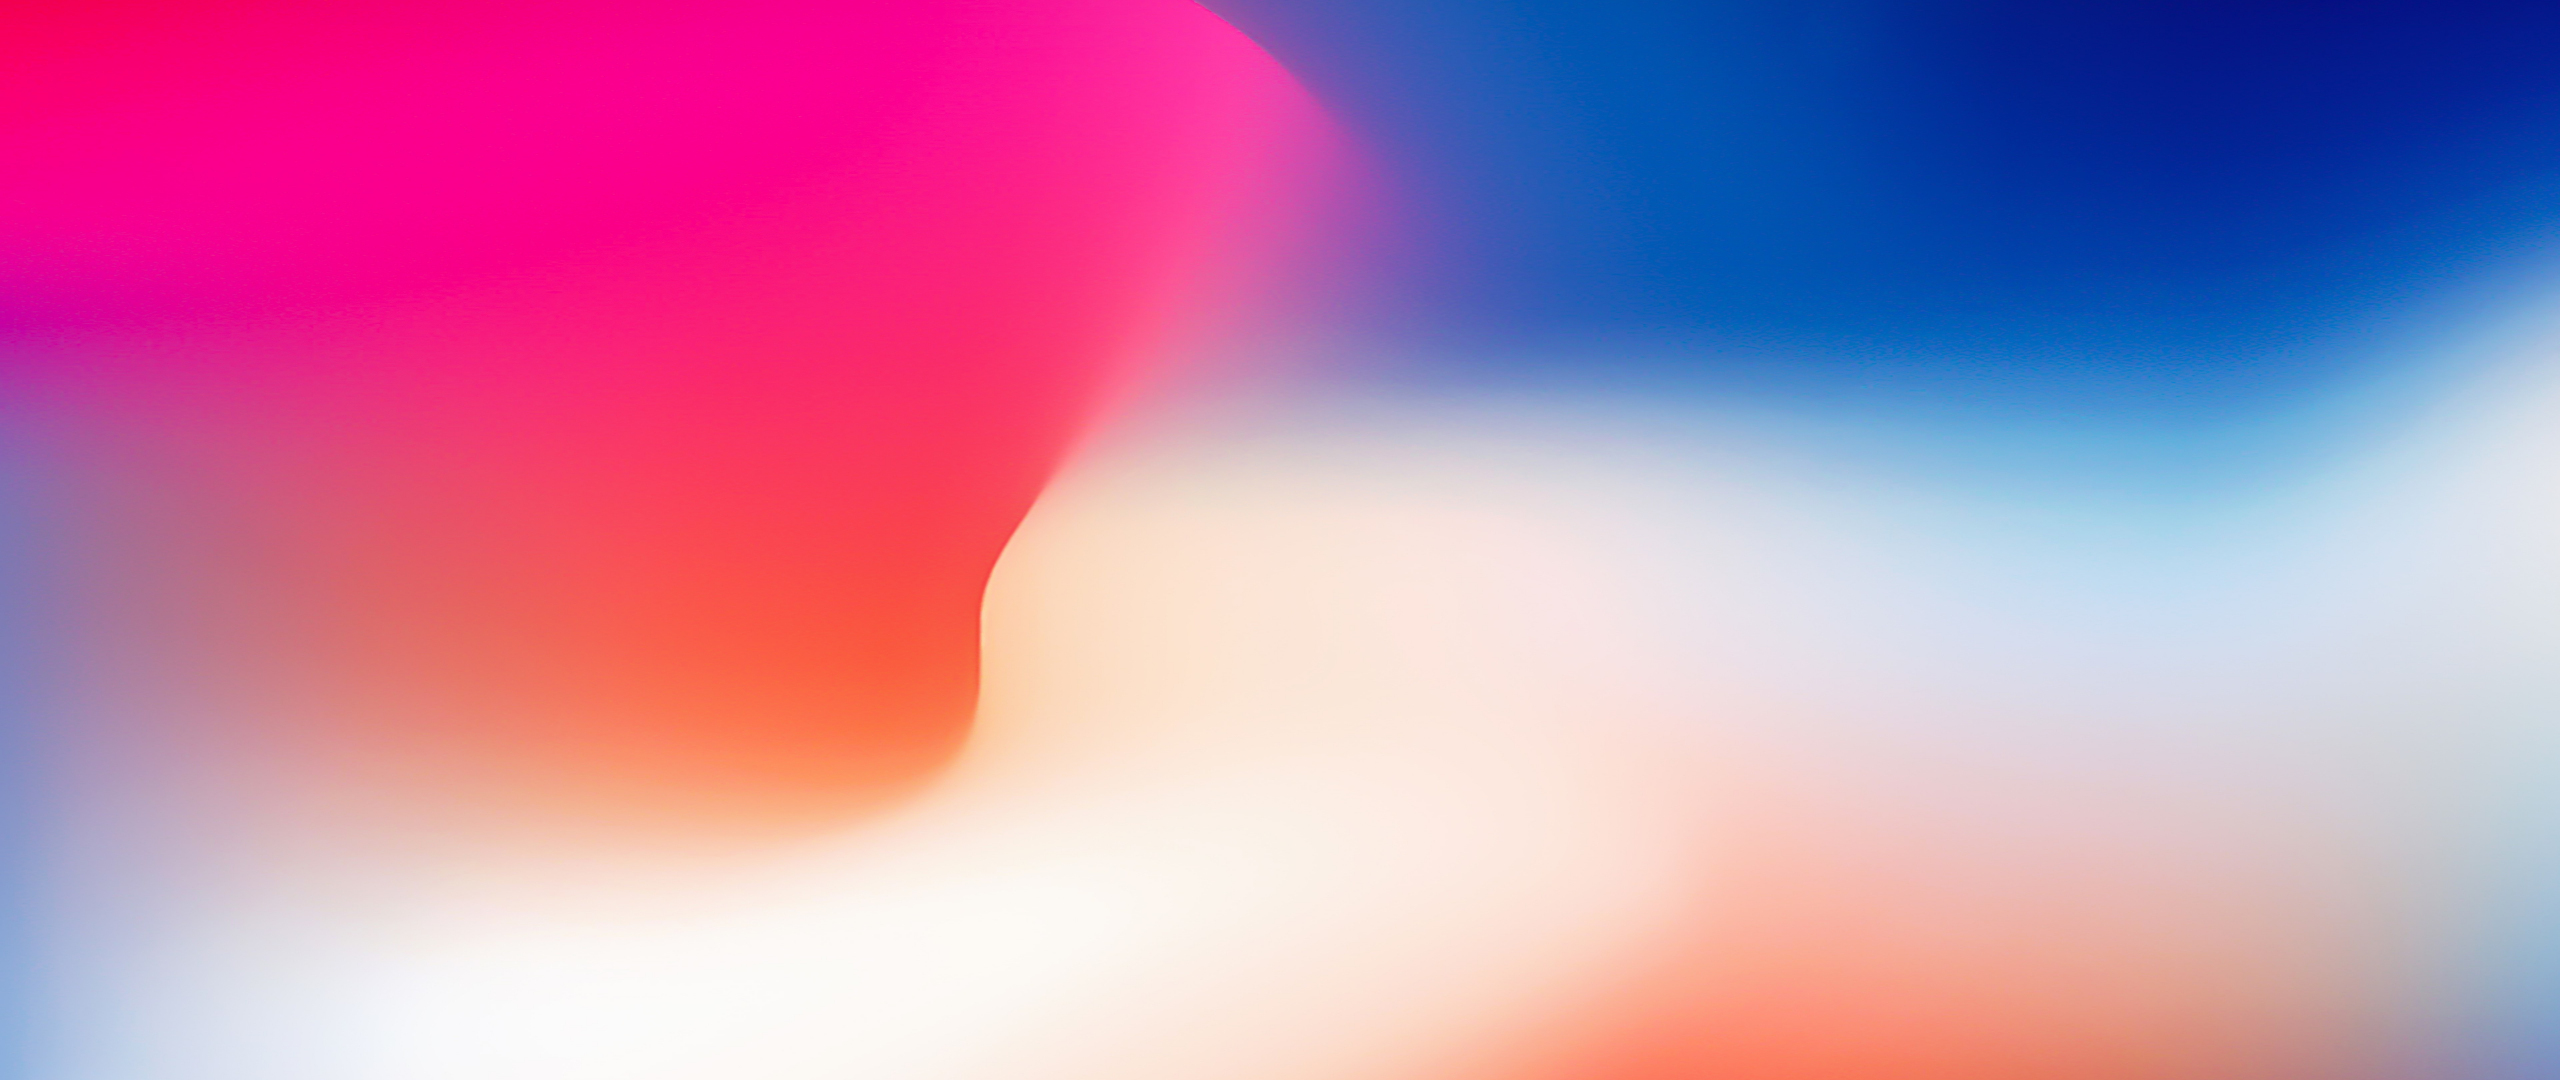 Download wallpaper 2560x1080 iphone x, stock, colorful gradient ...